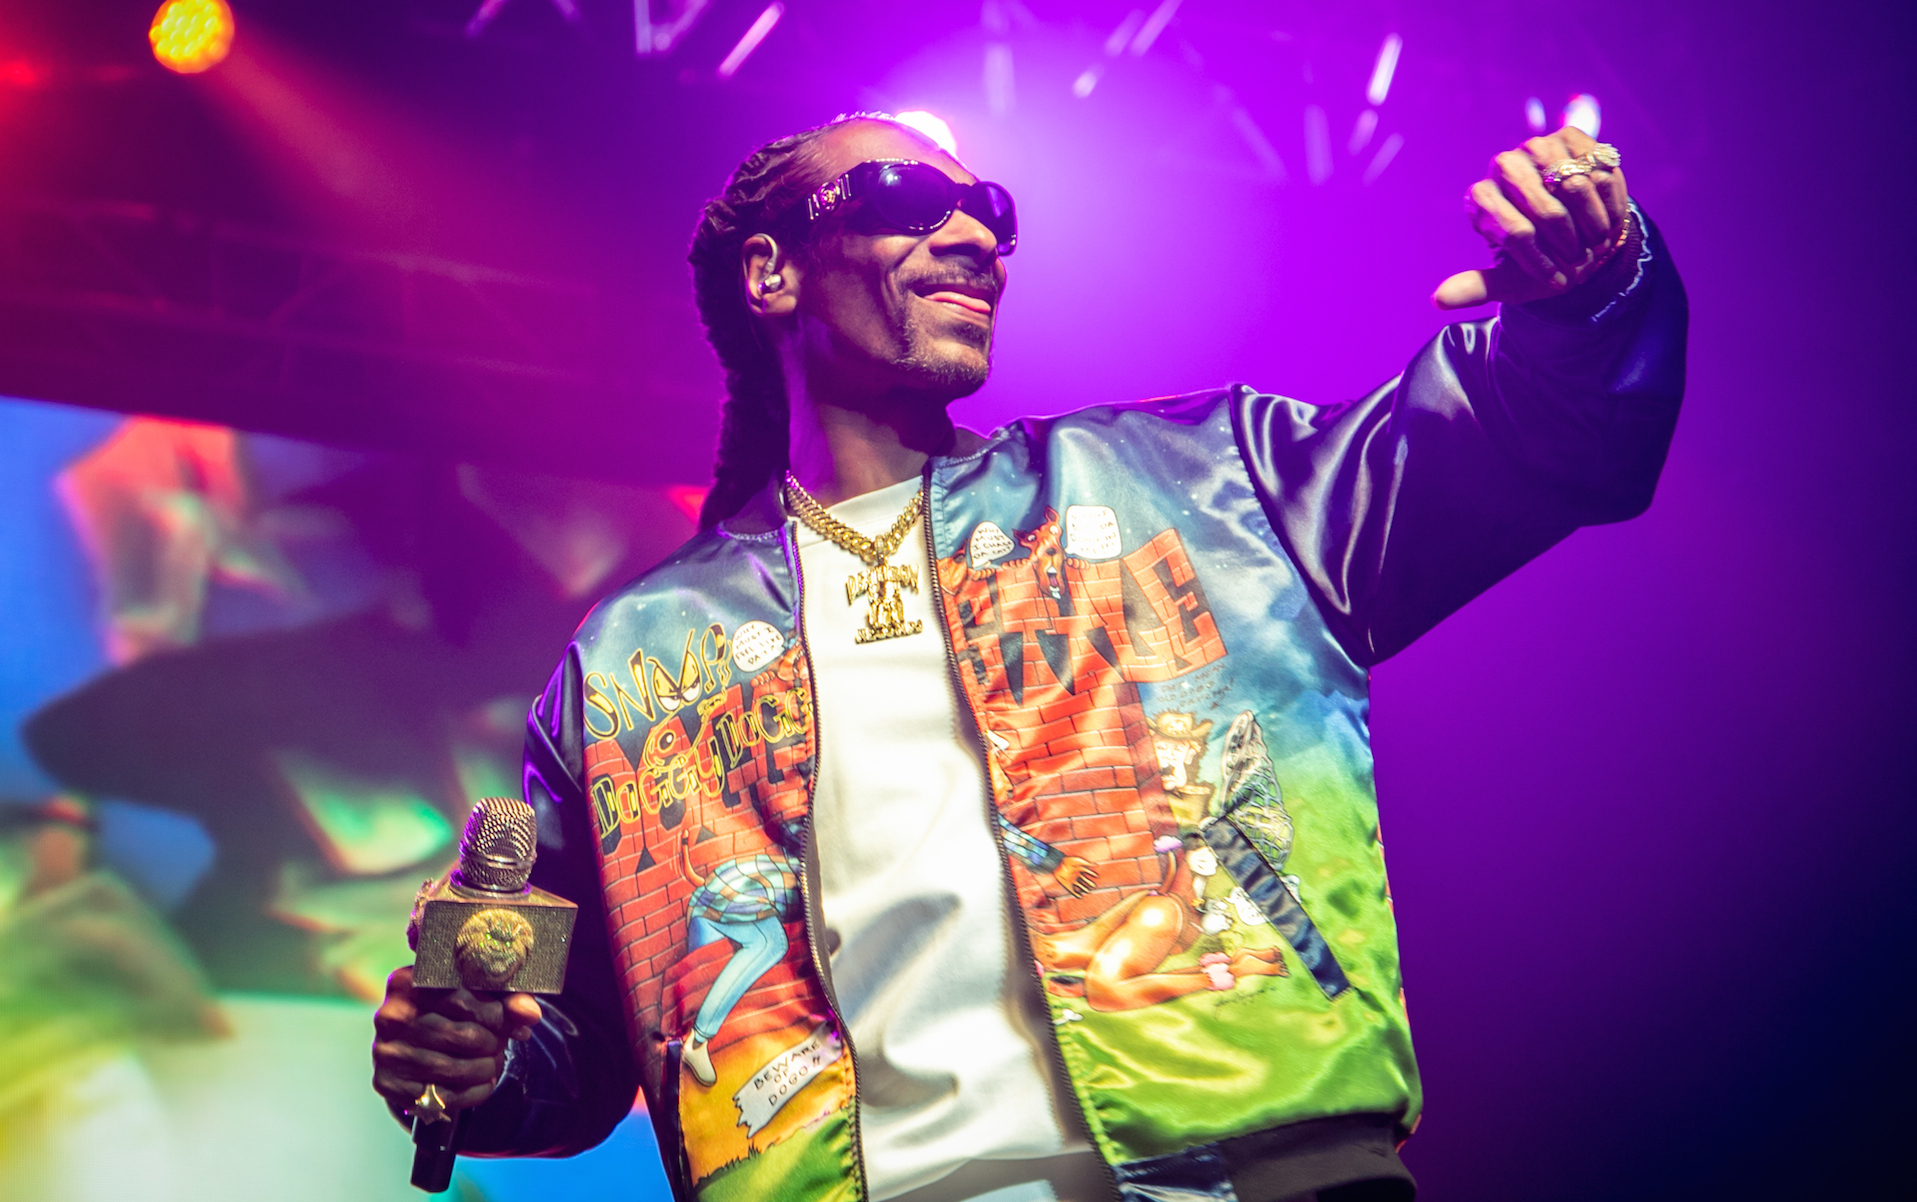 Snoop Dogg refuses to cancel gig…performs to sell out crowd hours after his mother’s death